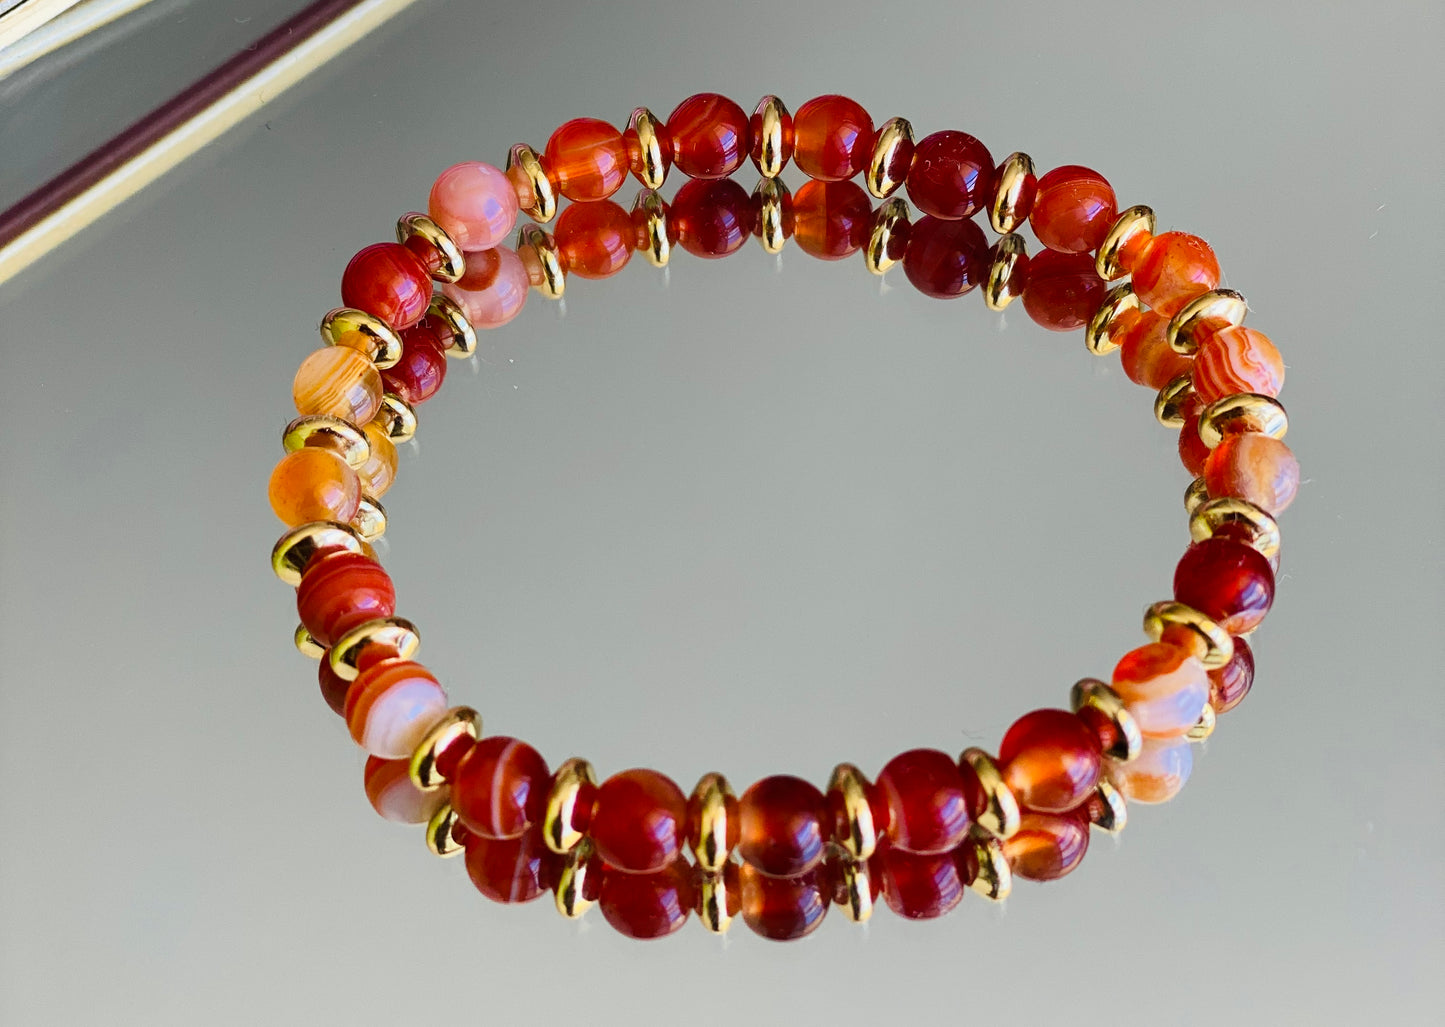 RADIANT CONFIDENCE | Natural stone beads